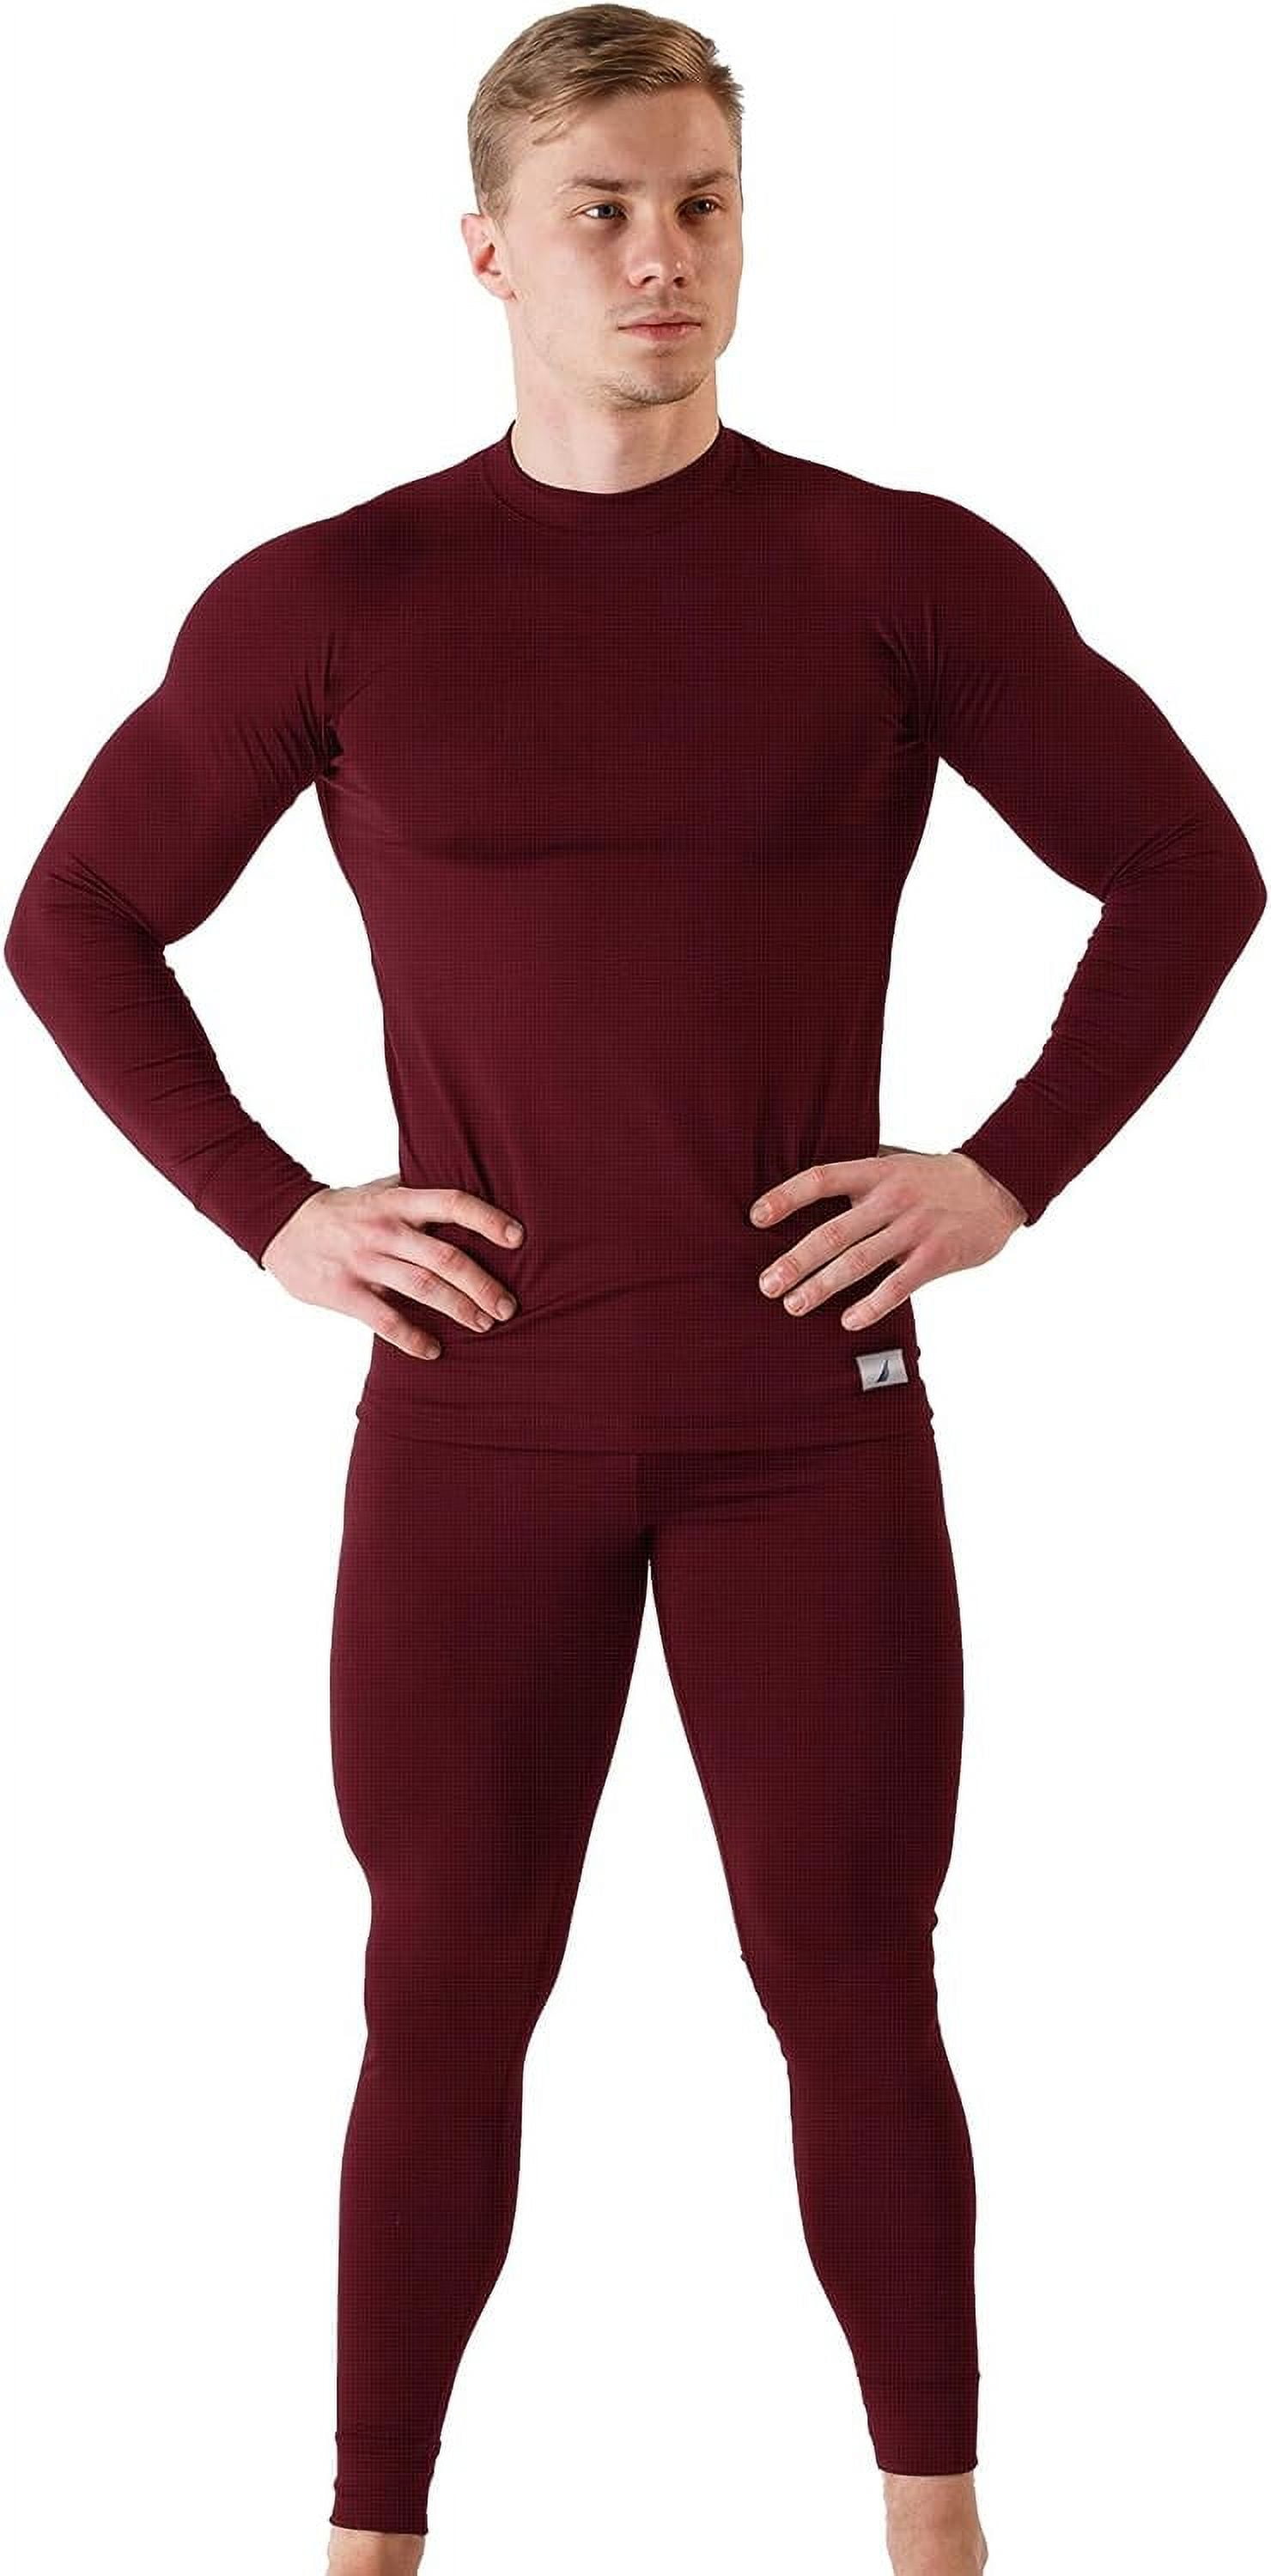 Nautica Mens Thermal Underwear Set Insulated Shirt & Long Johns, Shipwreck  Red Small 